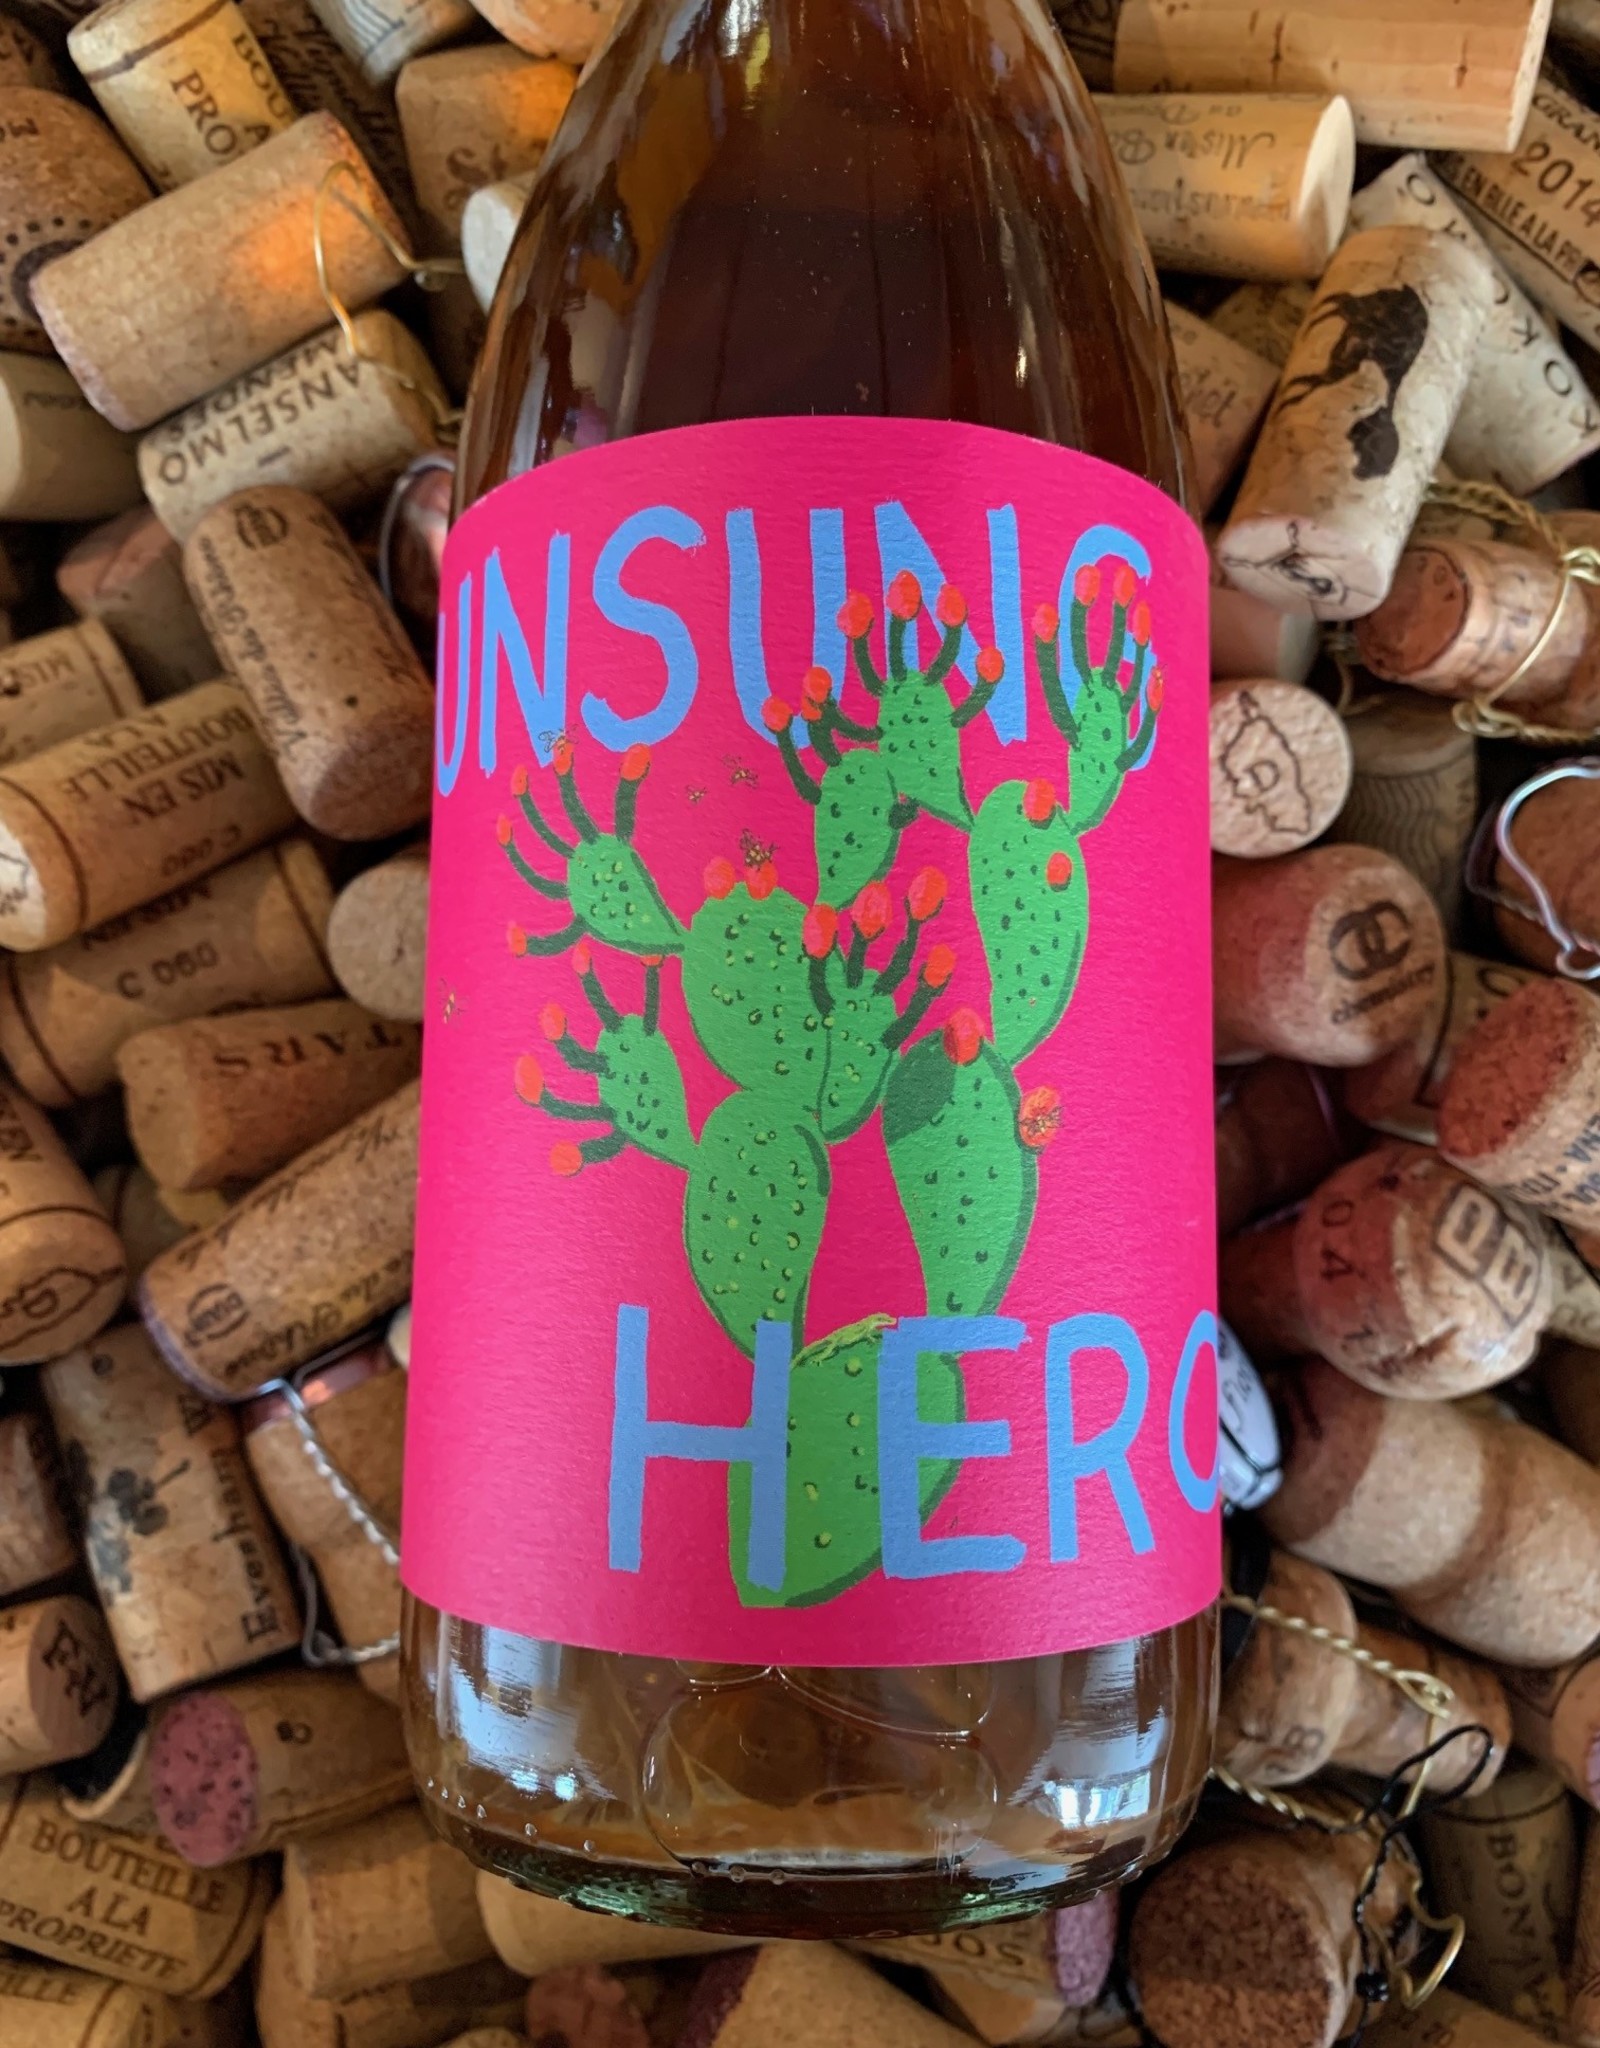 Subject To Change  Unsung Hero (45% Marsanne, 30% Roussanne, and 25% Viognier) California